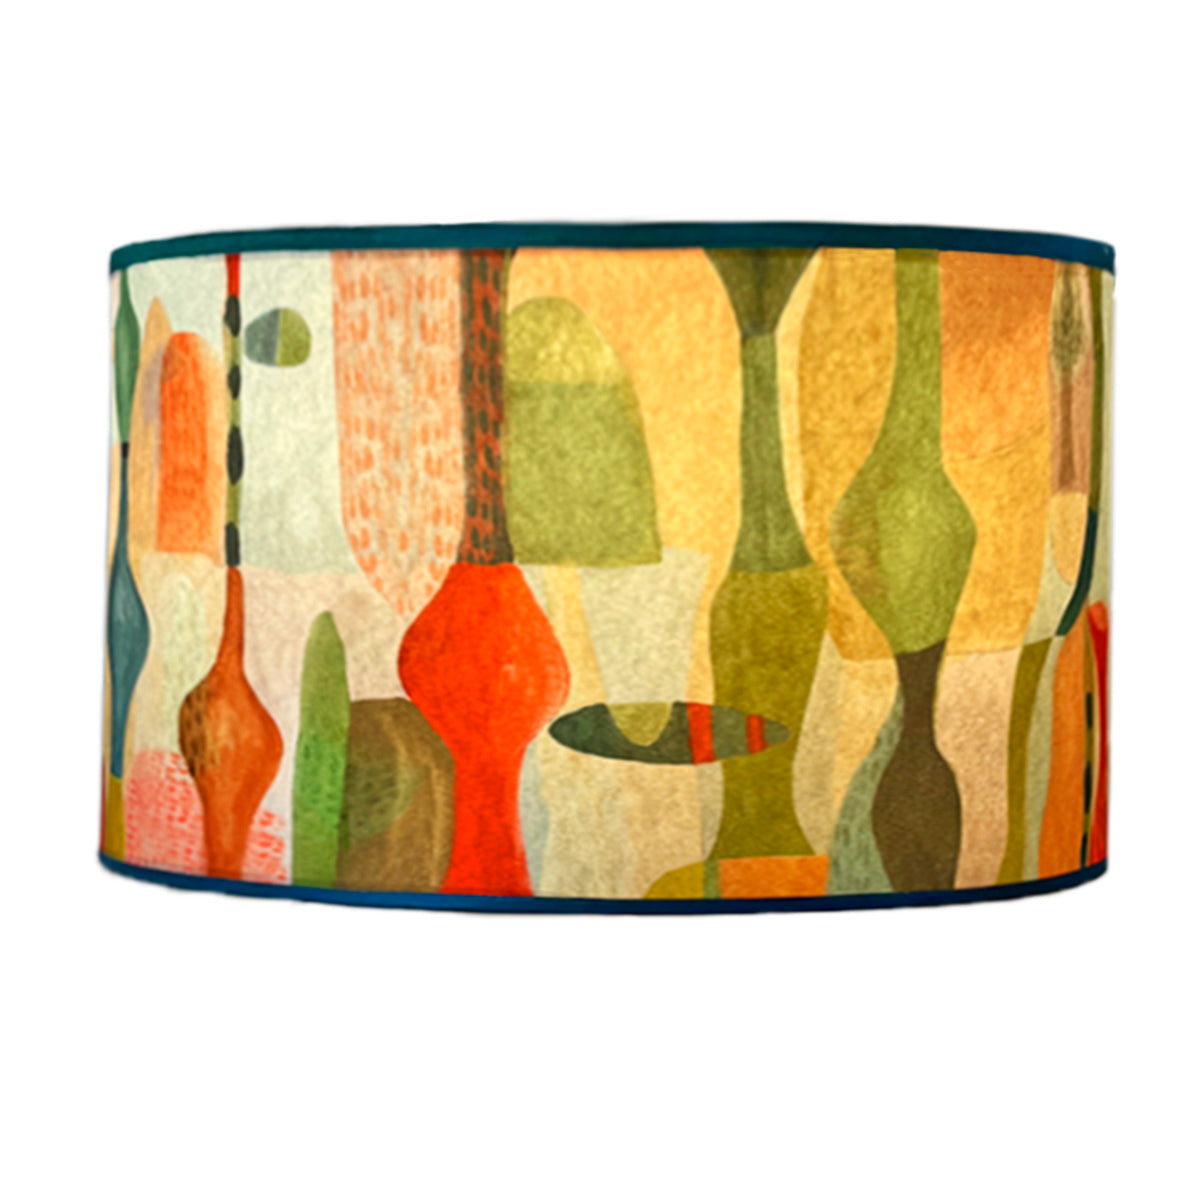 Janna Ugone & Co Lamp Shades Large Drum Lamp Shade in Riviera in Poppy